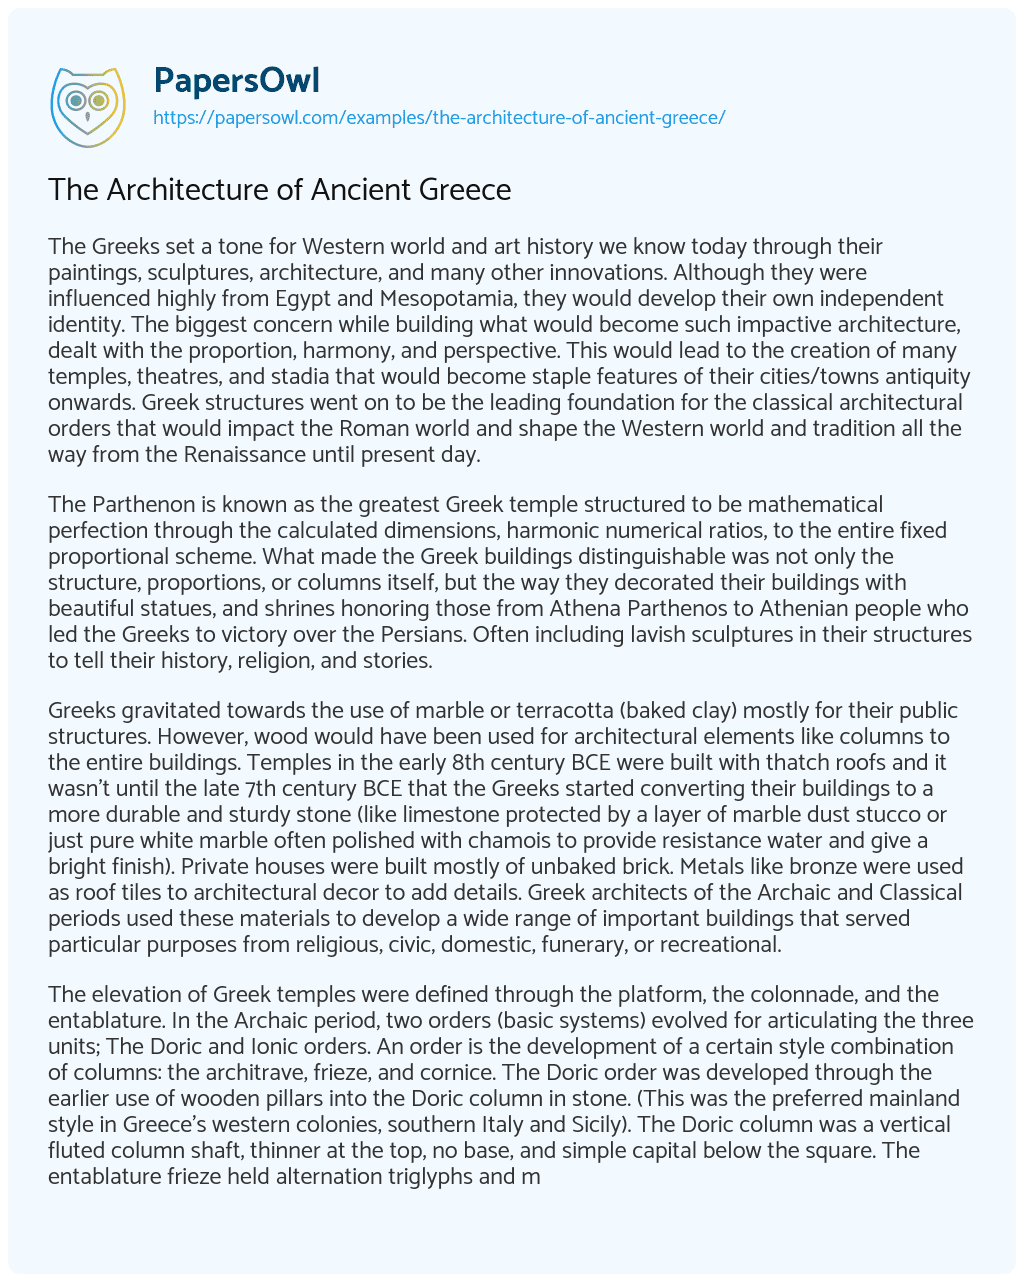 The Architecture of Ancient Greece essay